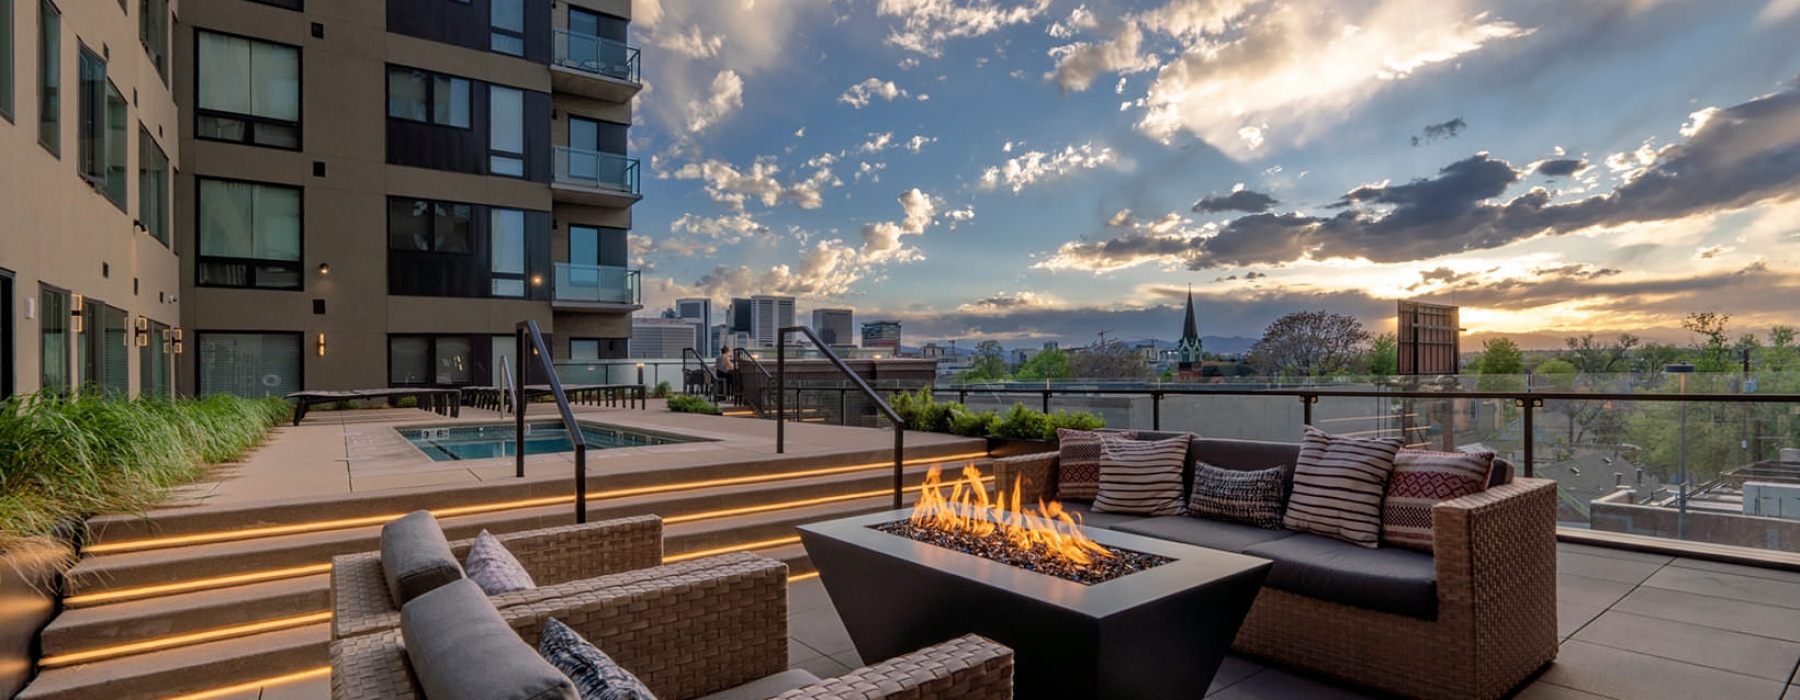 fire pit and sitting area on rooftop lounge with city views